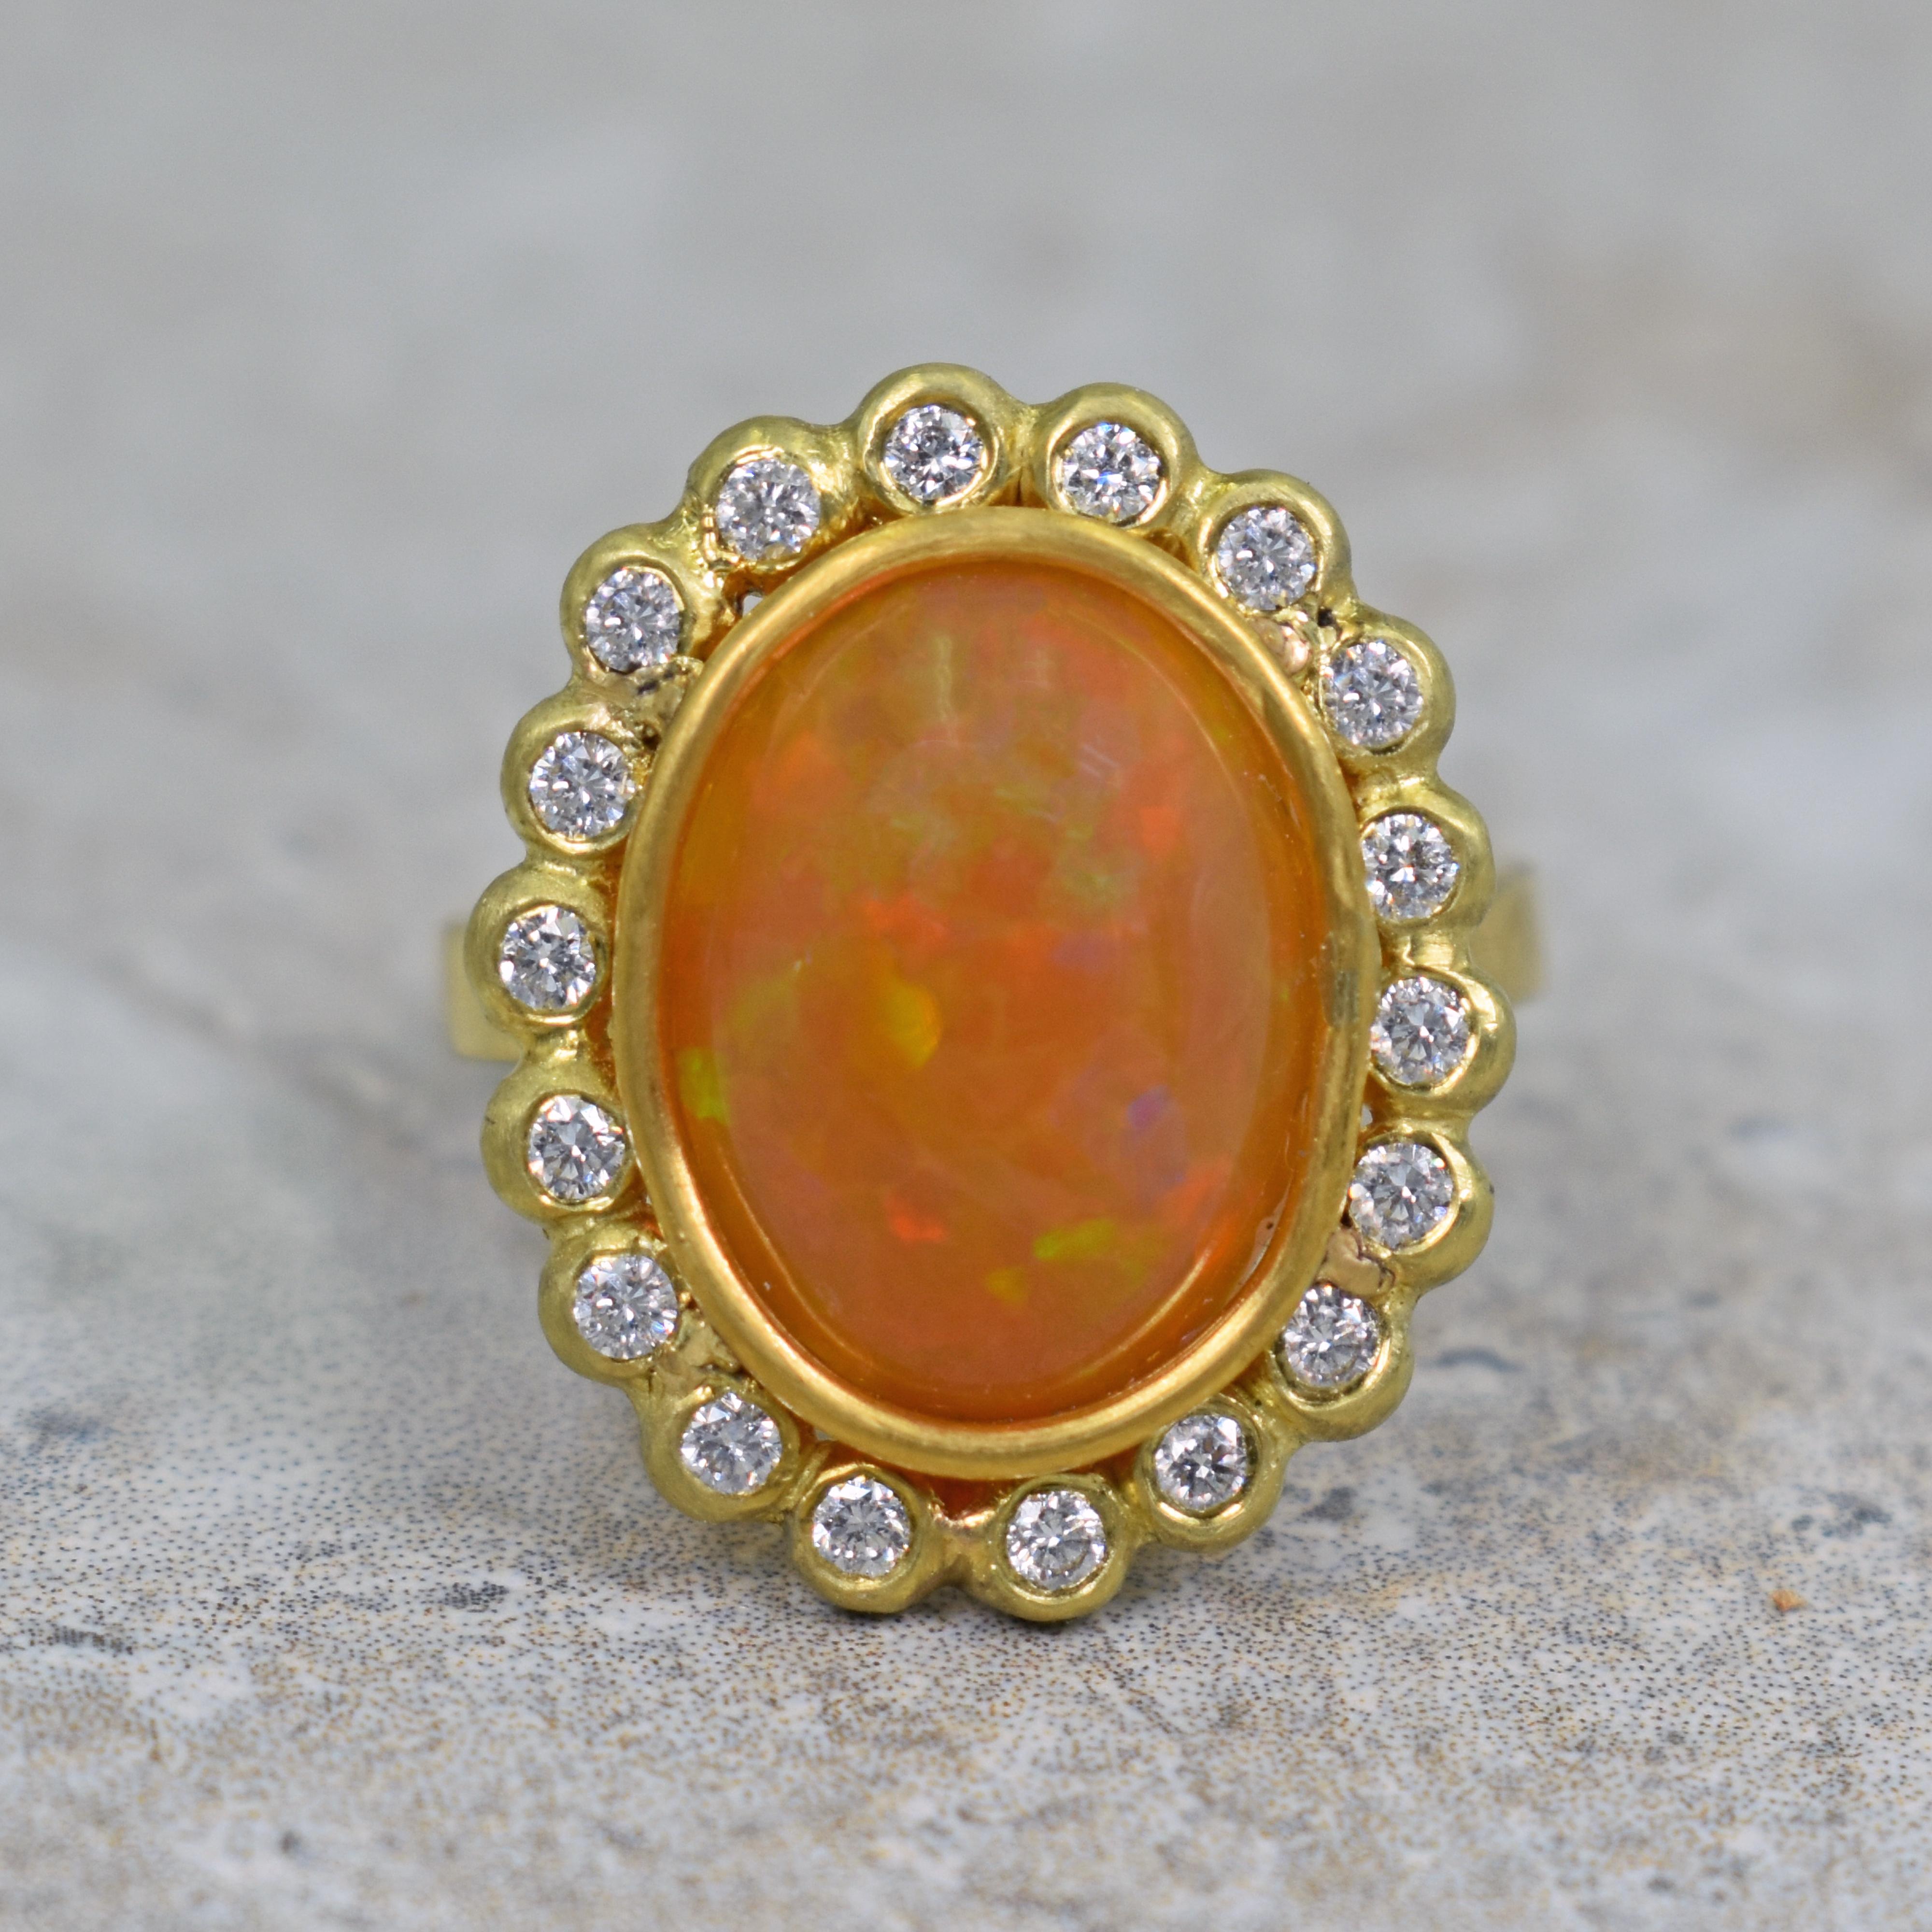 6.14 carat oval Ethiopian Opal set in a hand fabricated 22k yellow gold and diamond halo ring. Halo has 18 diamonds (0.36 total carat weight, G-H, SI1). Size 6 1/2. One-of-a-kind artisan ring with a fiery opal gemstone. 